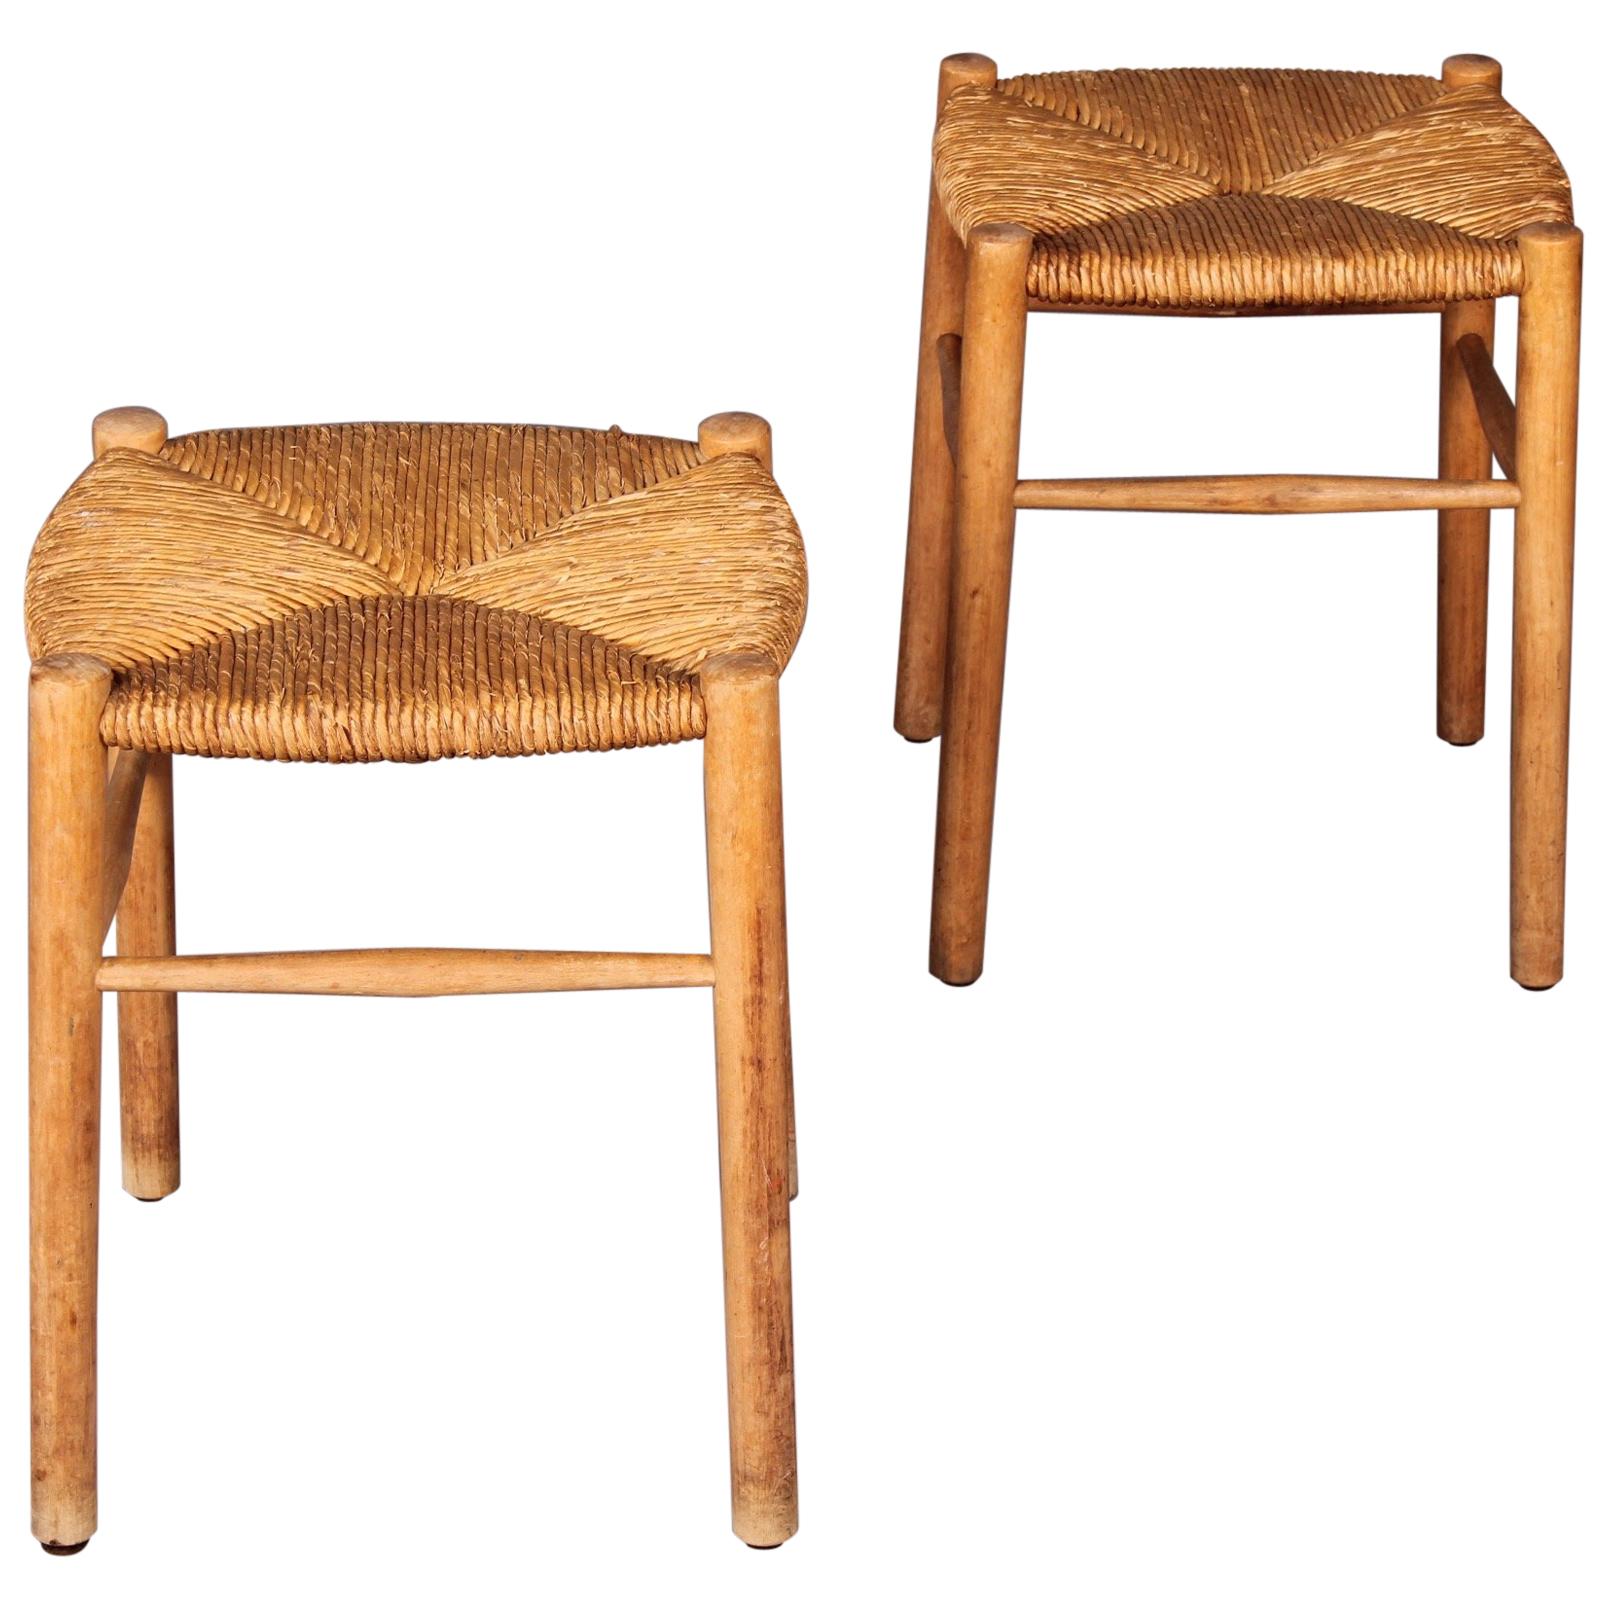 Wood and Straw Pair of Stools